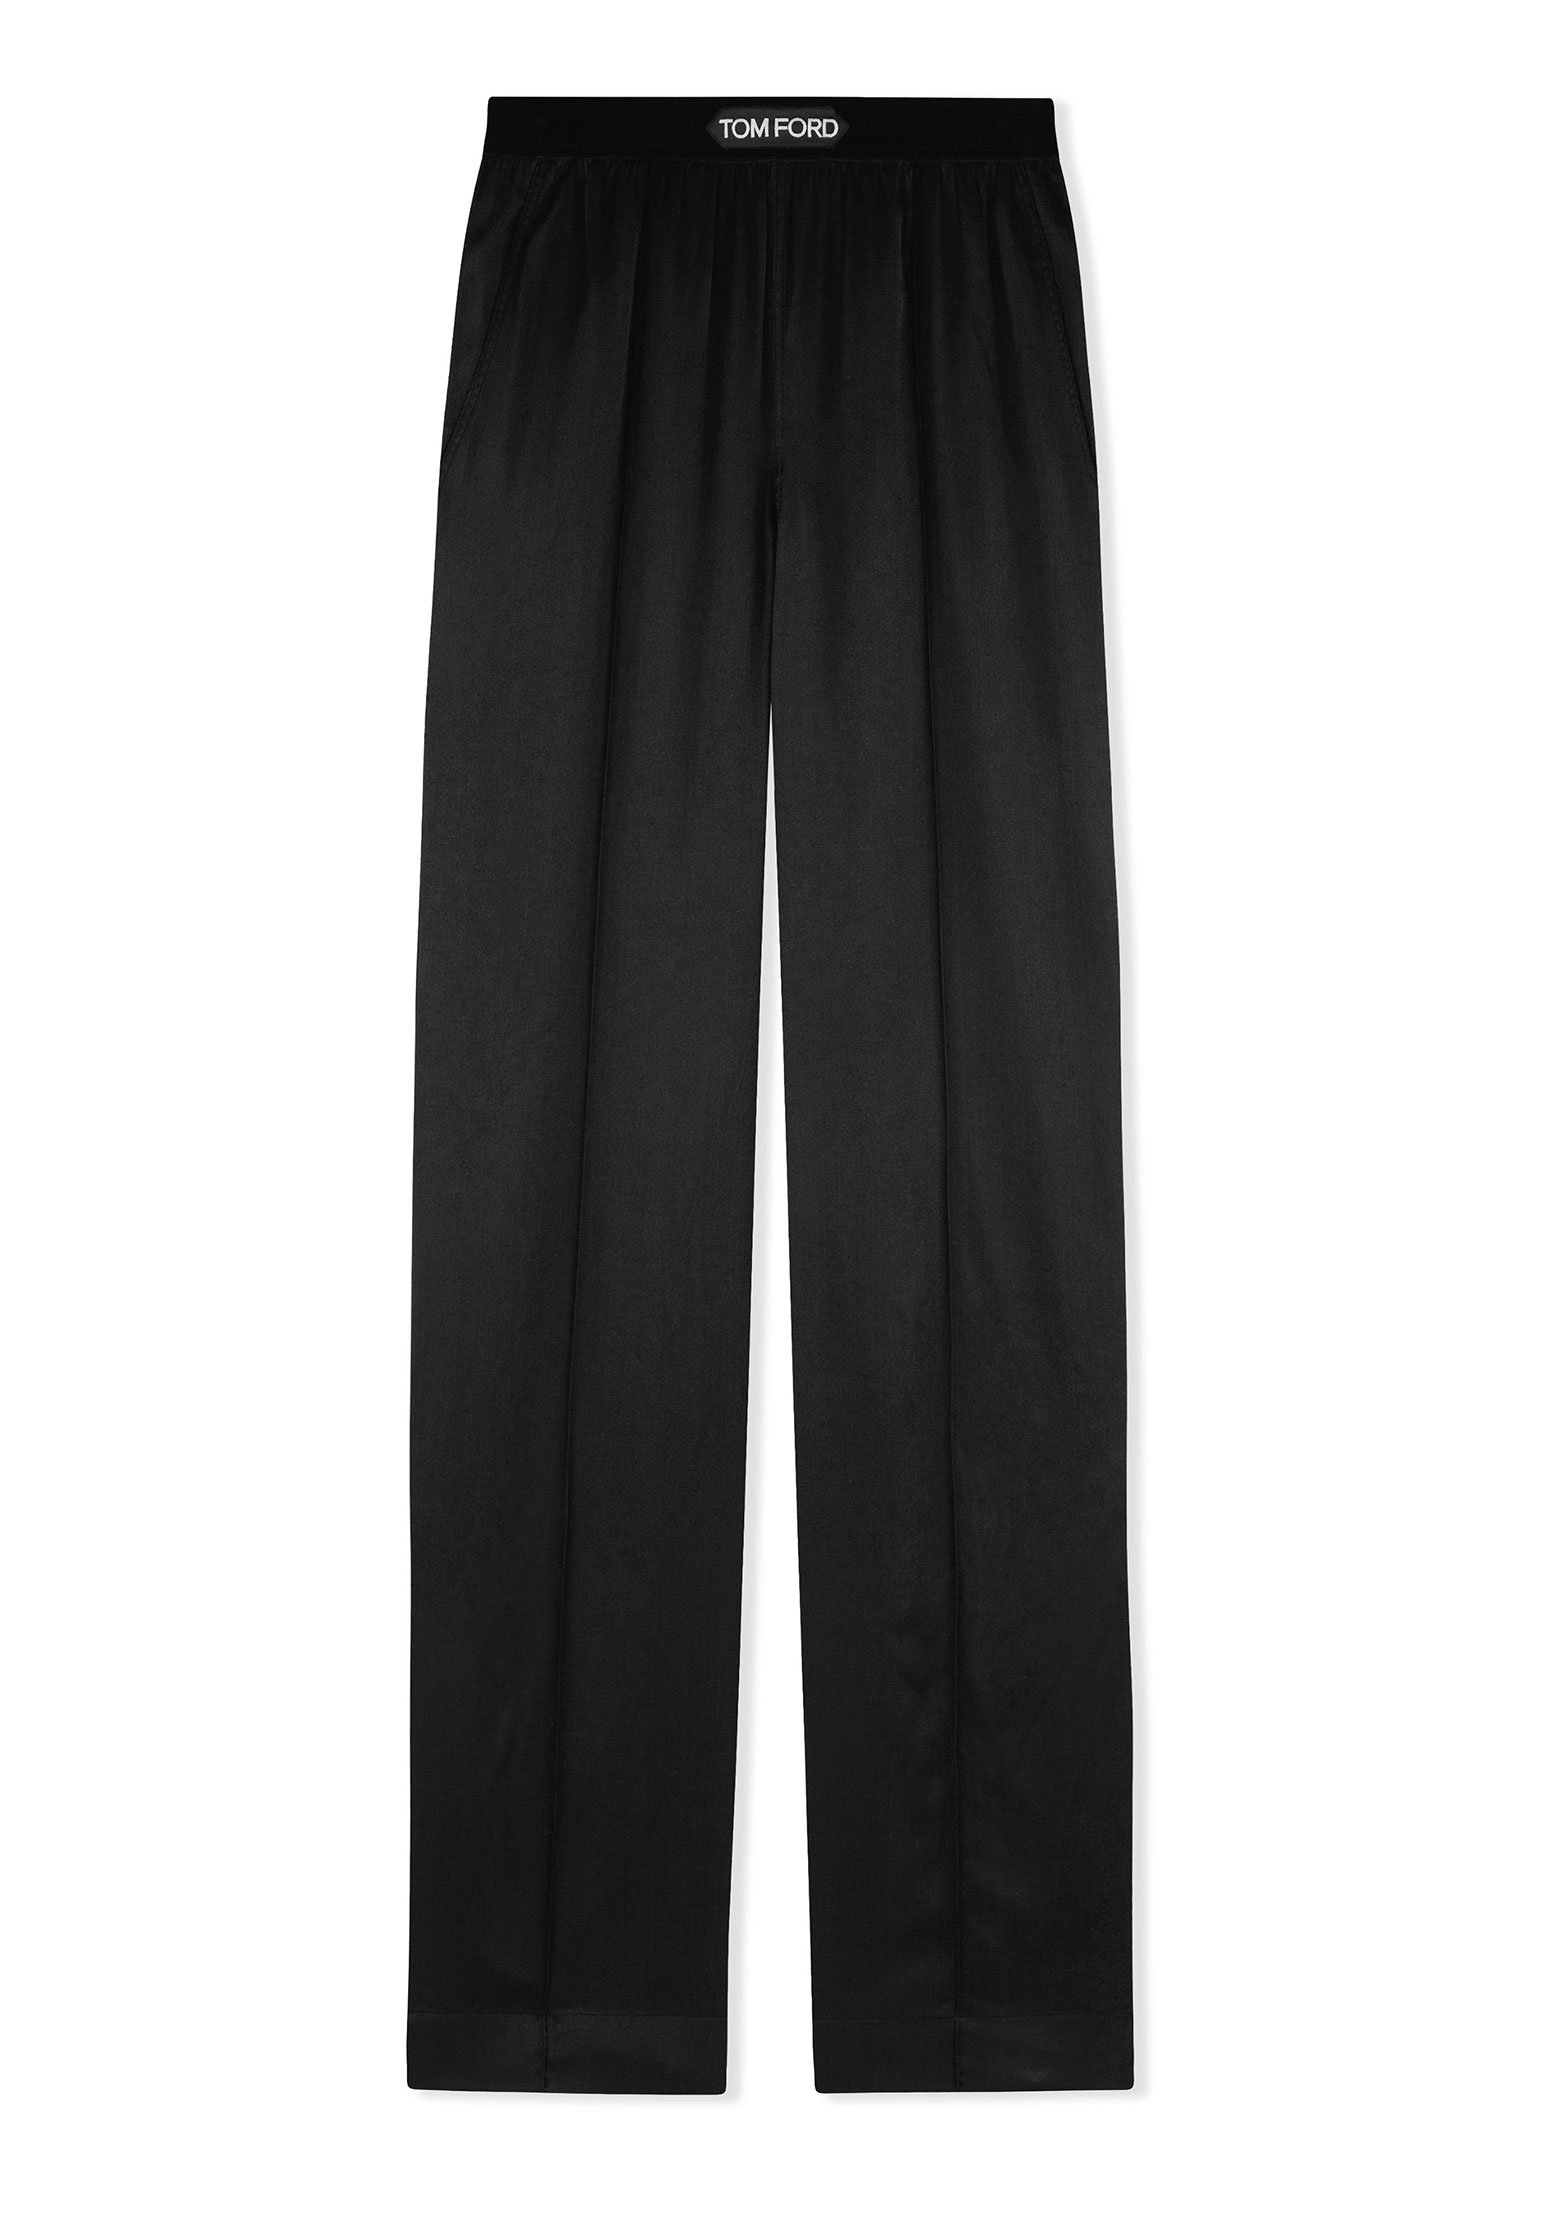 Pants TOM FORD Color: black (Code: 1065) in online store Allure